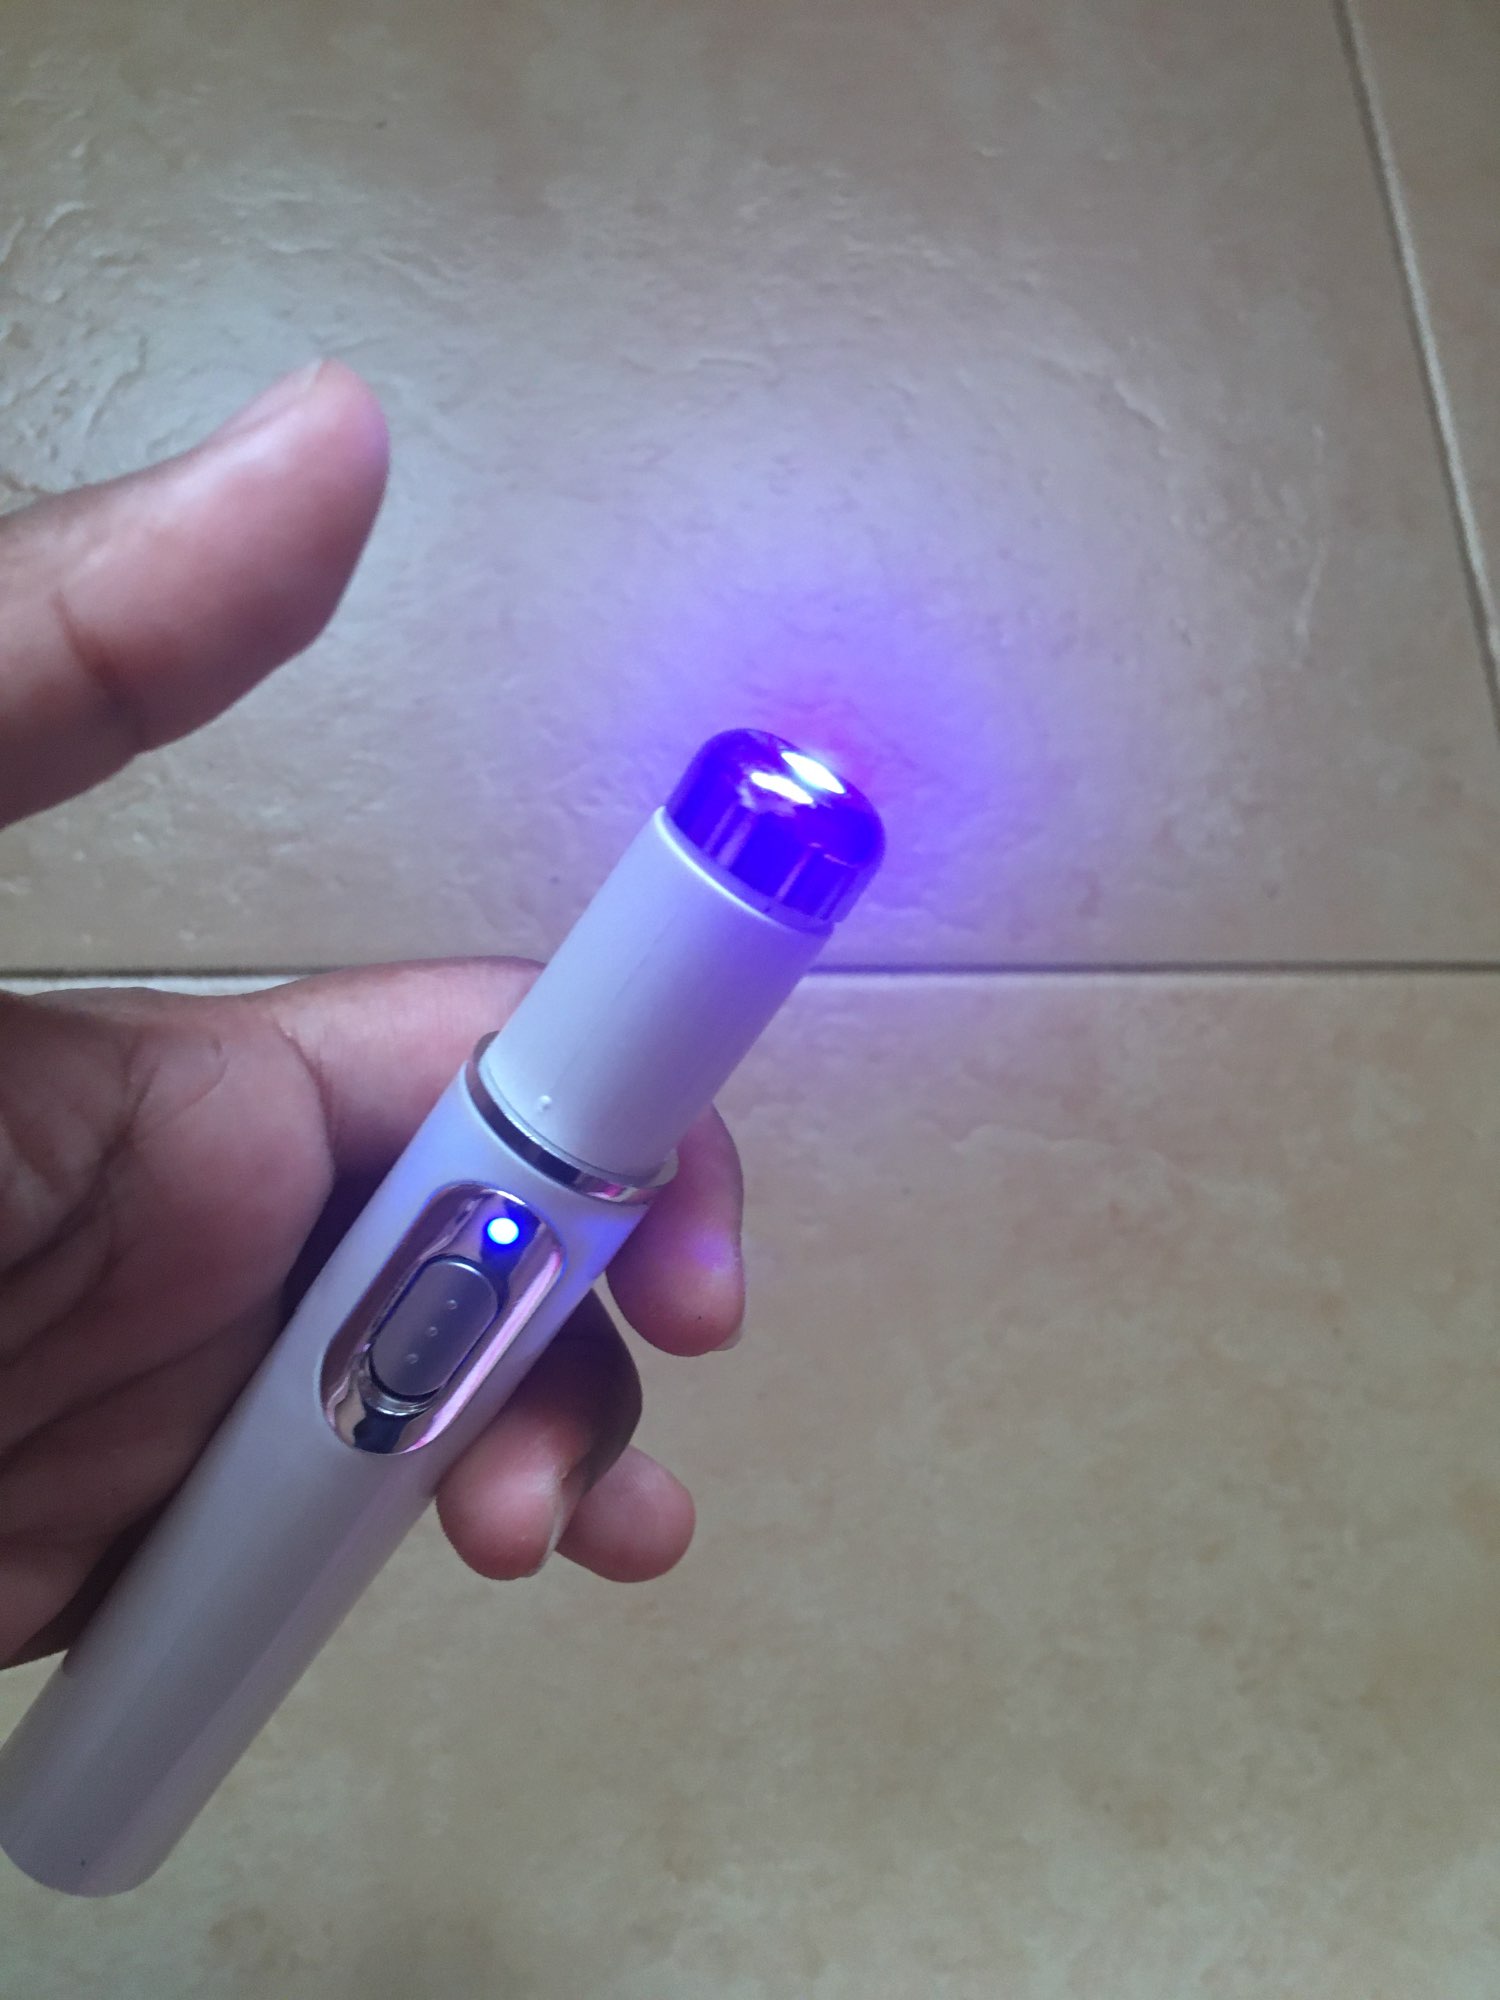 Medifwd Blue Light Therapy Varicose Veins Pen photo review